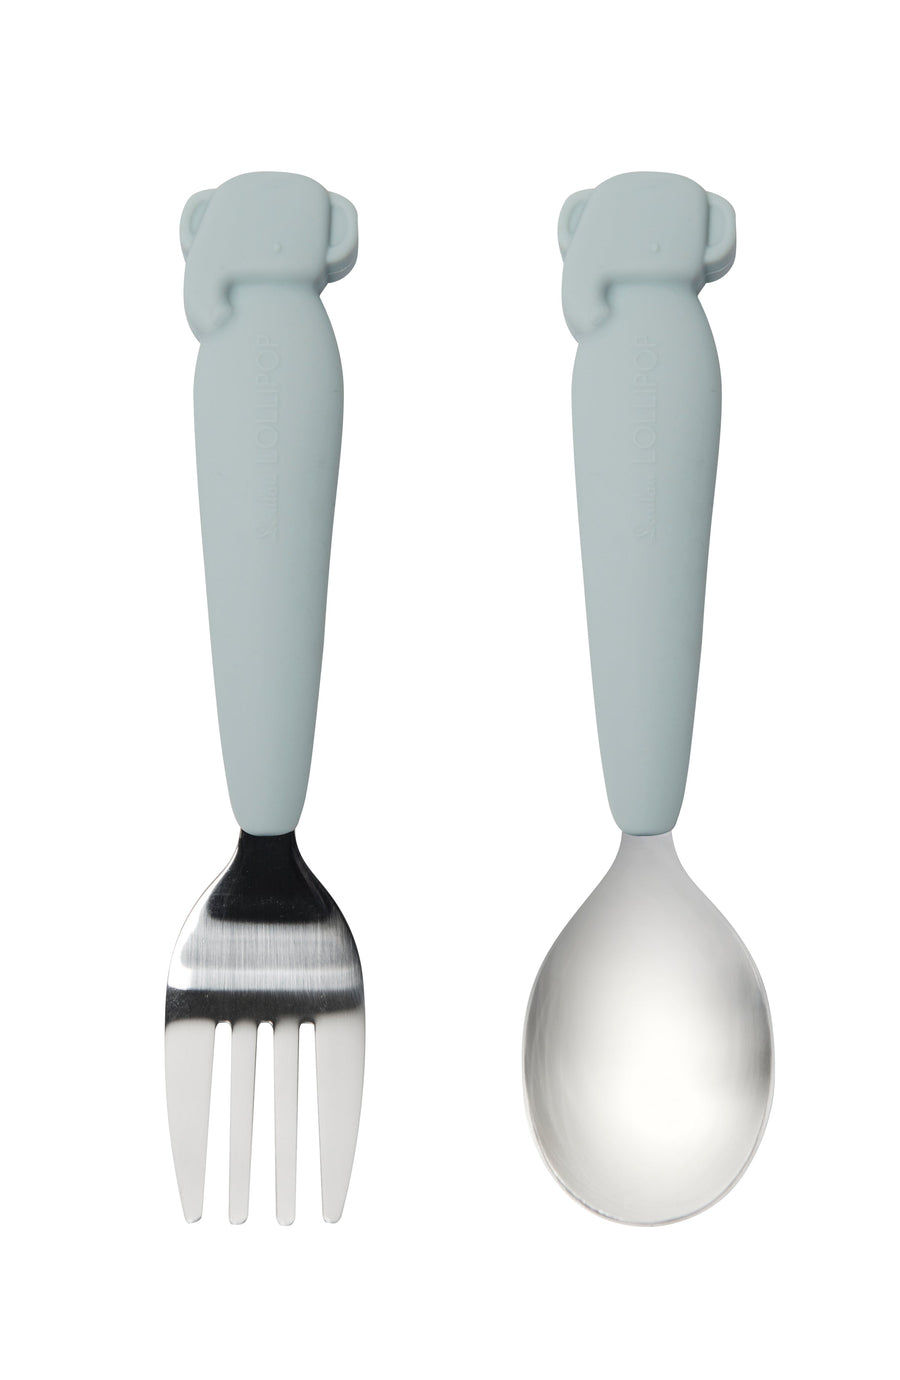 Born To Be Wild Kids spoon and fork set Eat Loulou Lollipop Elephant 